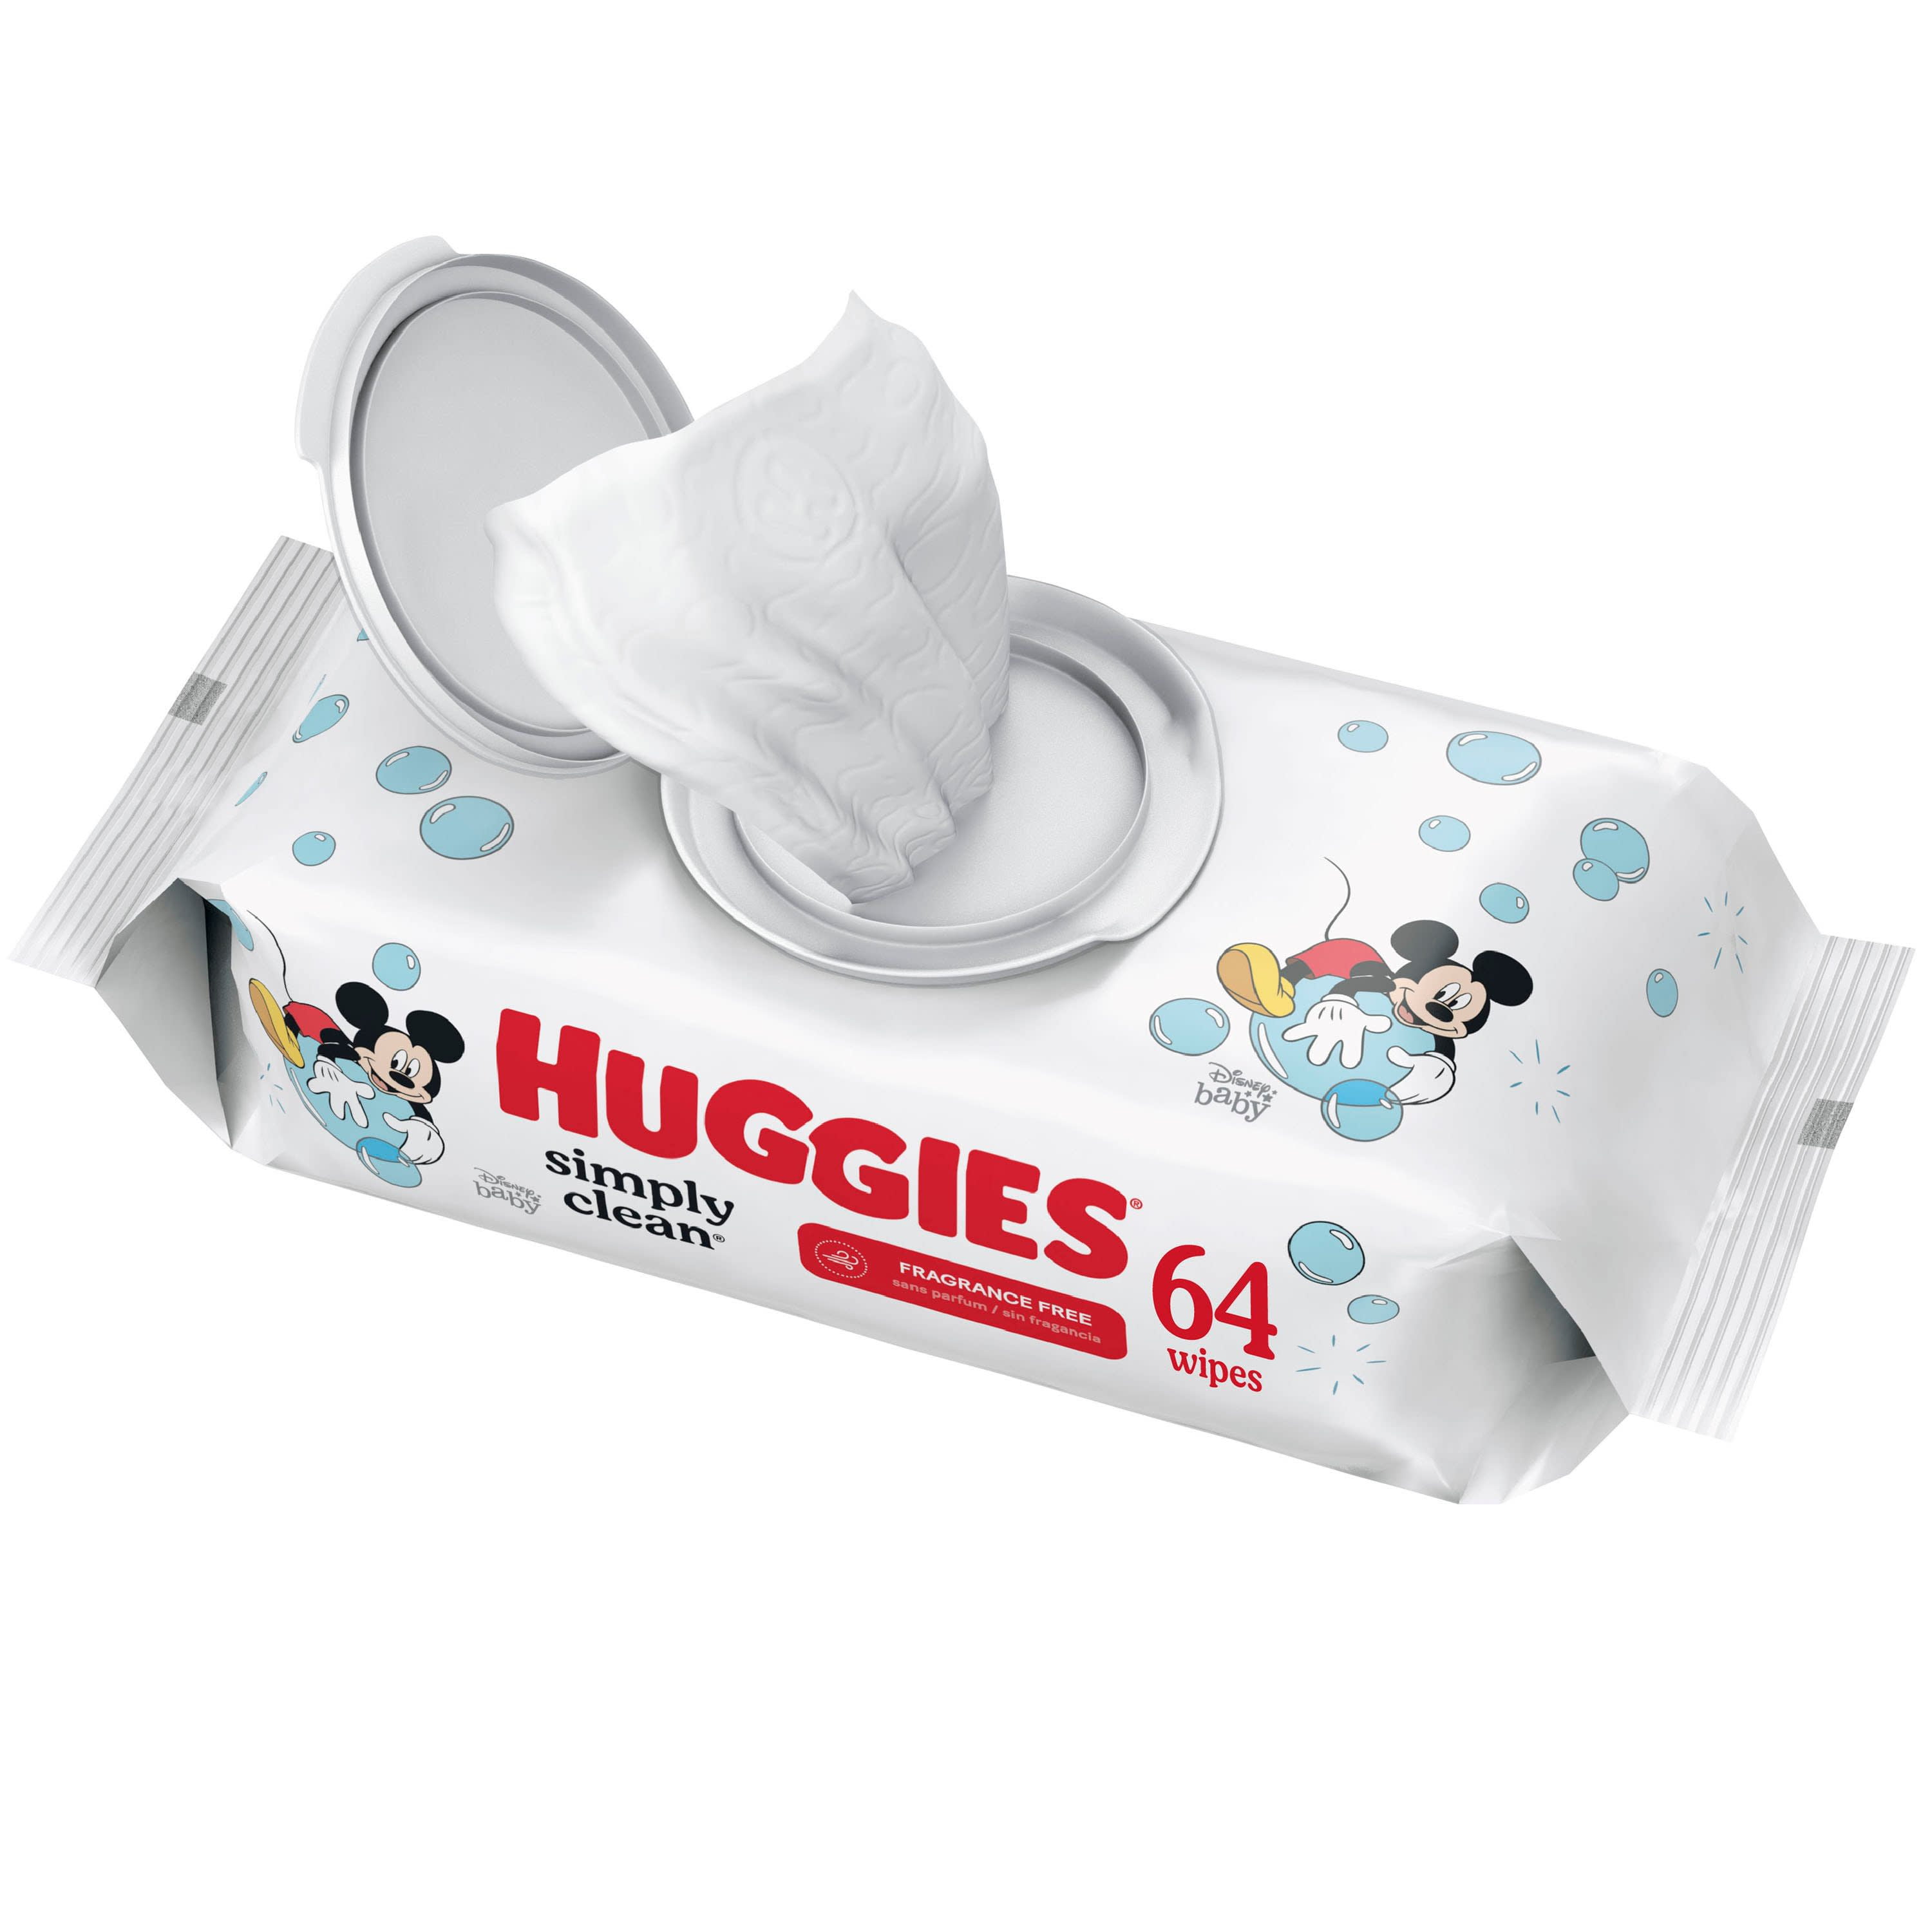 HUGGIES BABY WIPES FRAGRANCE FREE UNSCENTED WET TISSUE 640 SHEETS BUNDLE PACK 